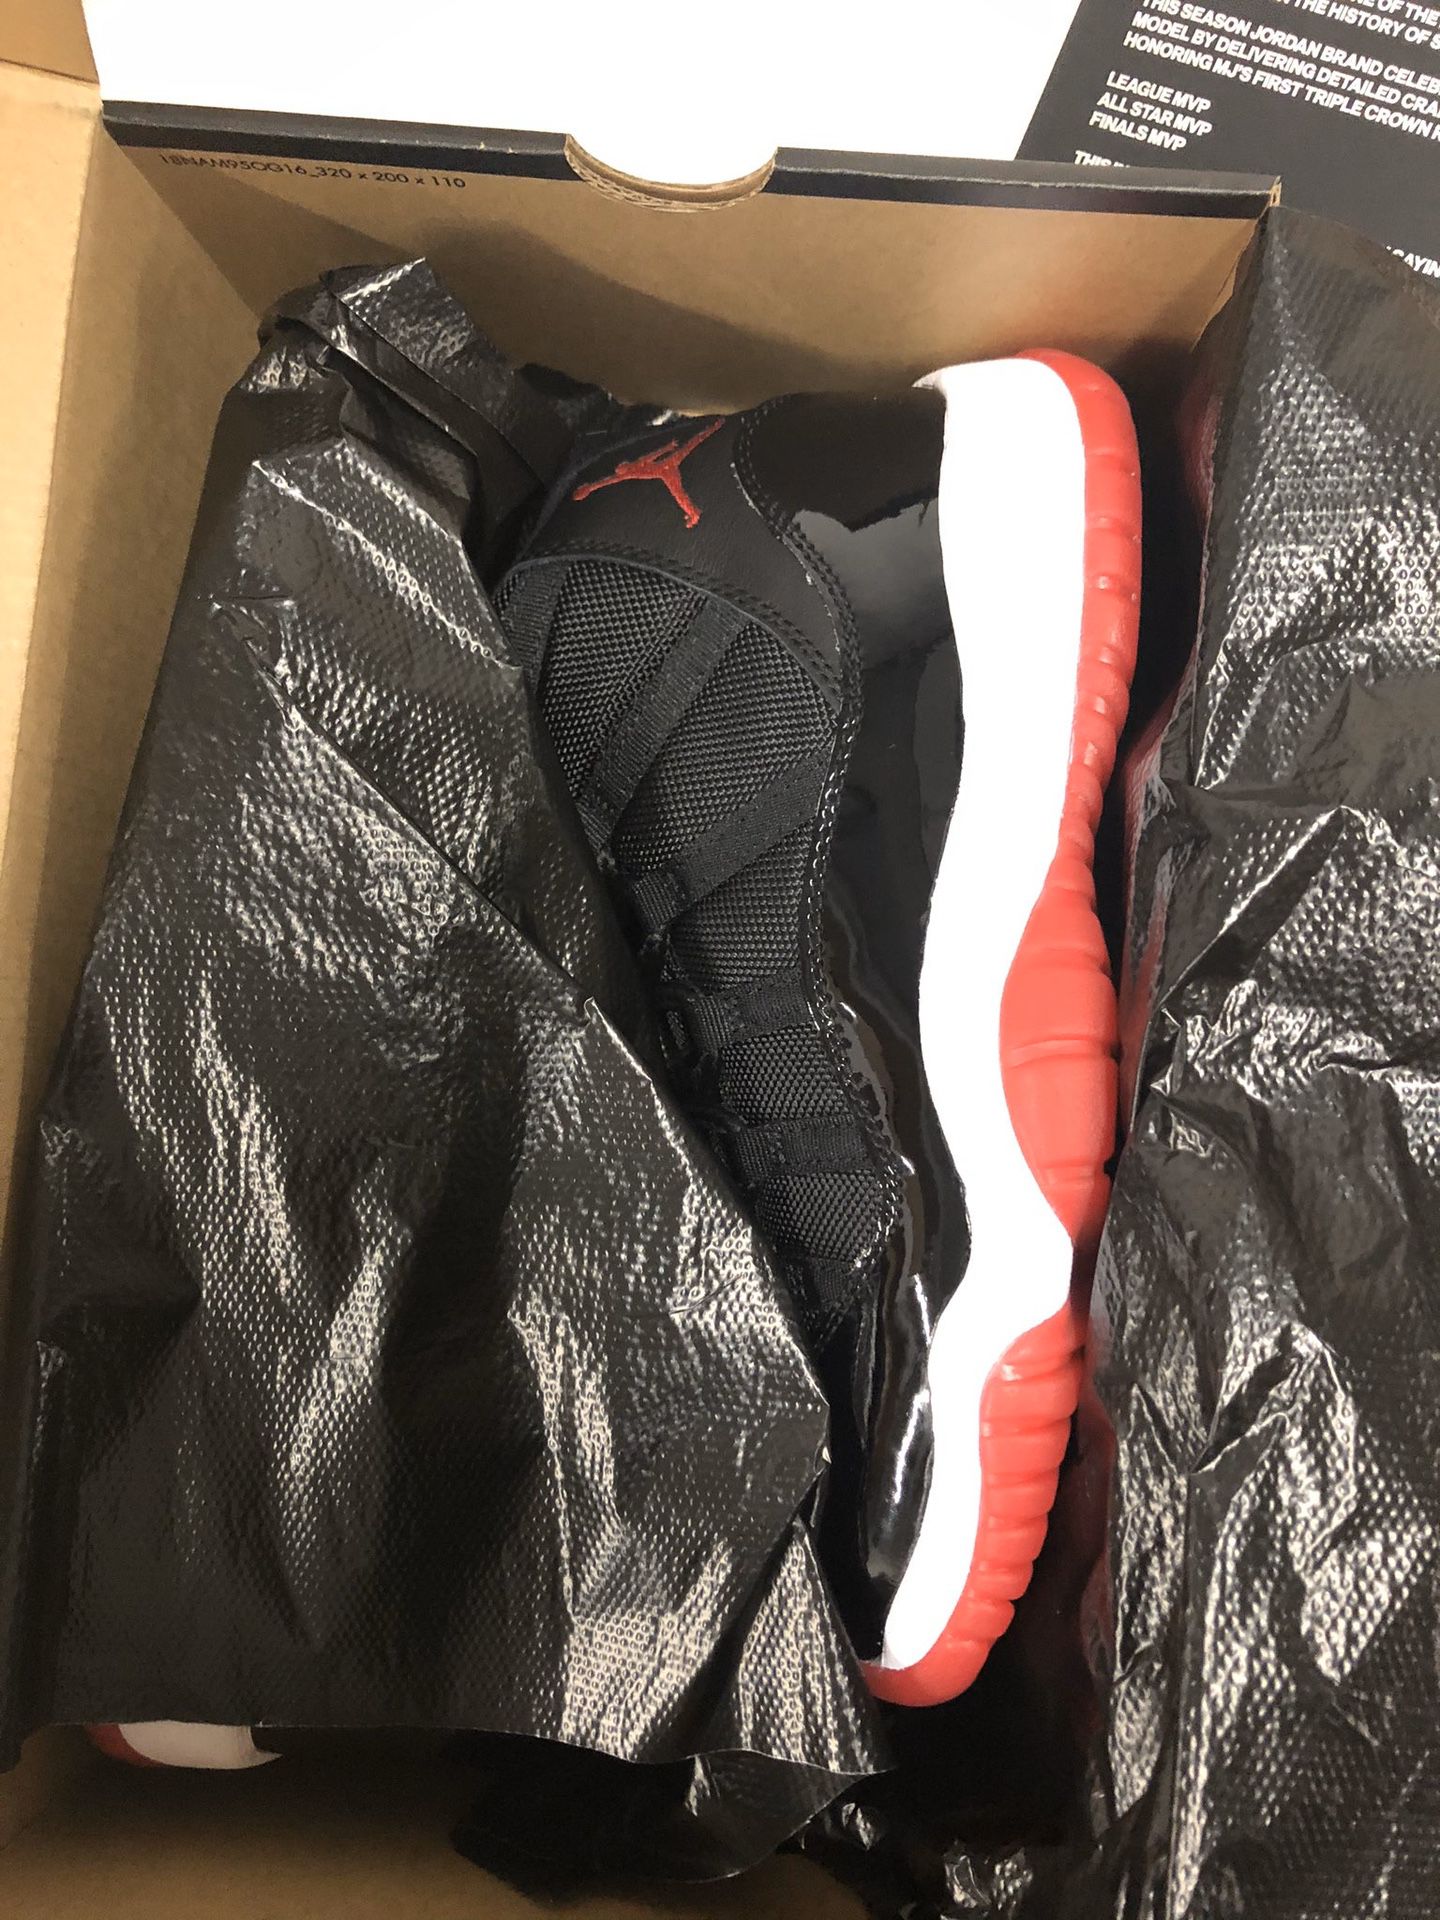 Nike Air Jordan 11 Size 9 and 11 available